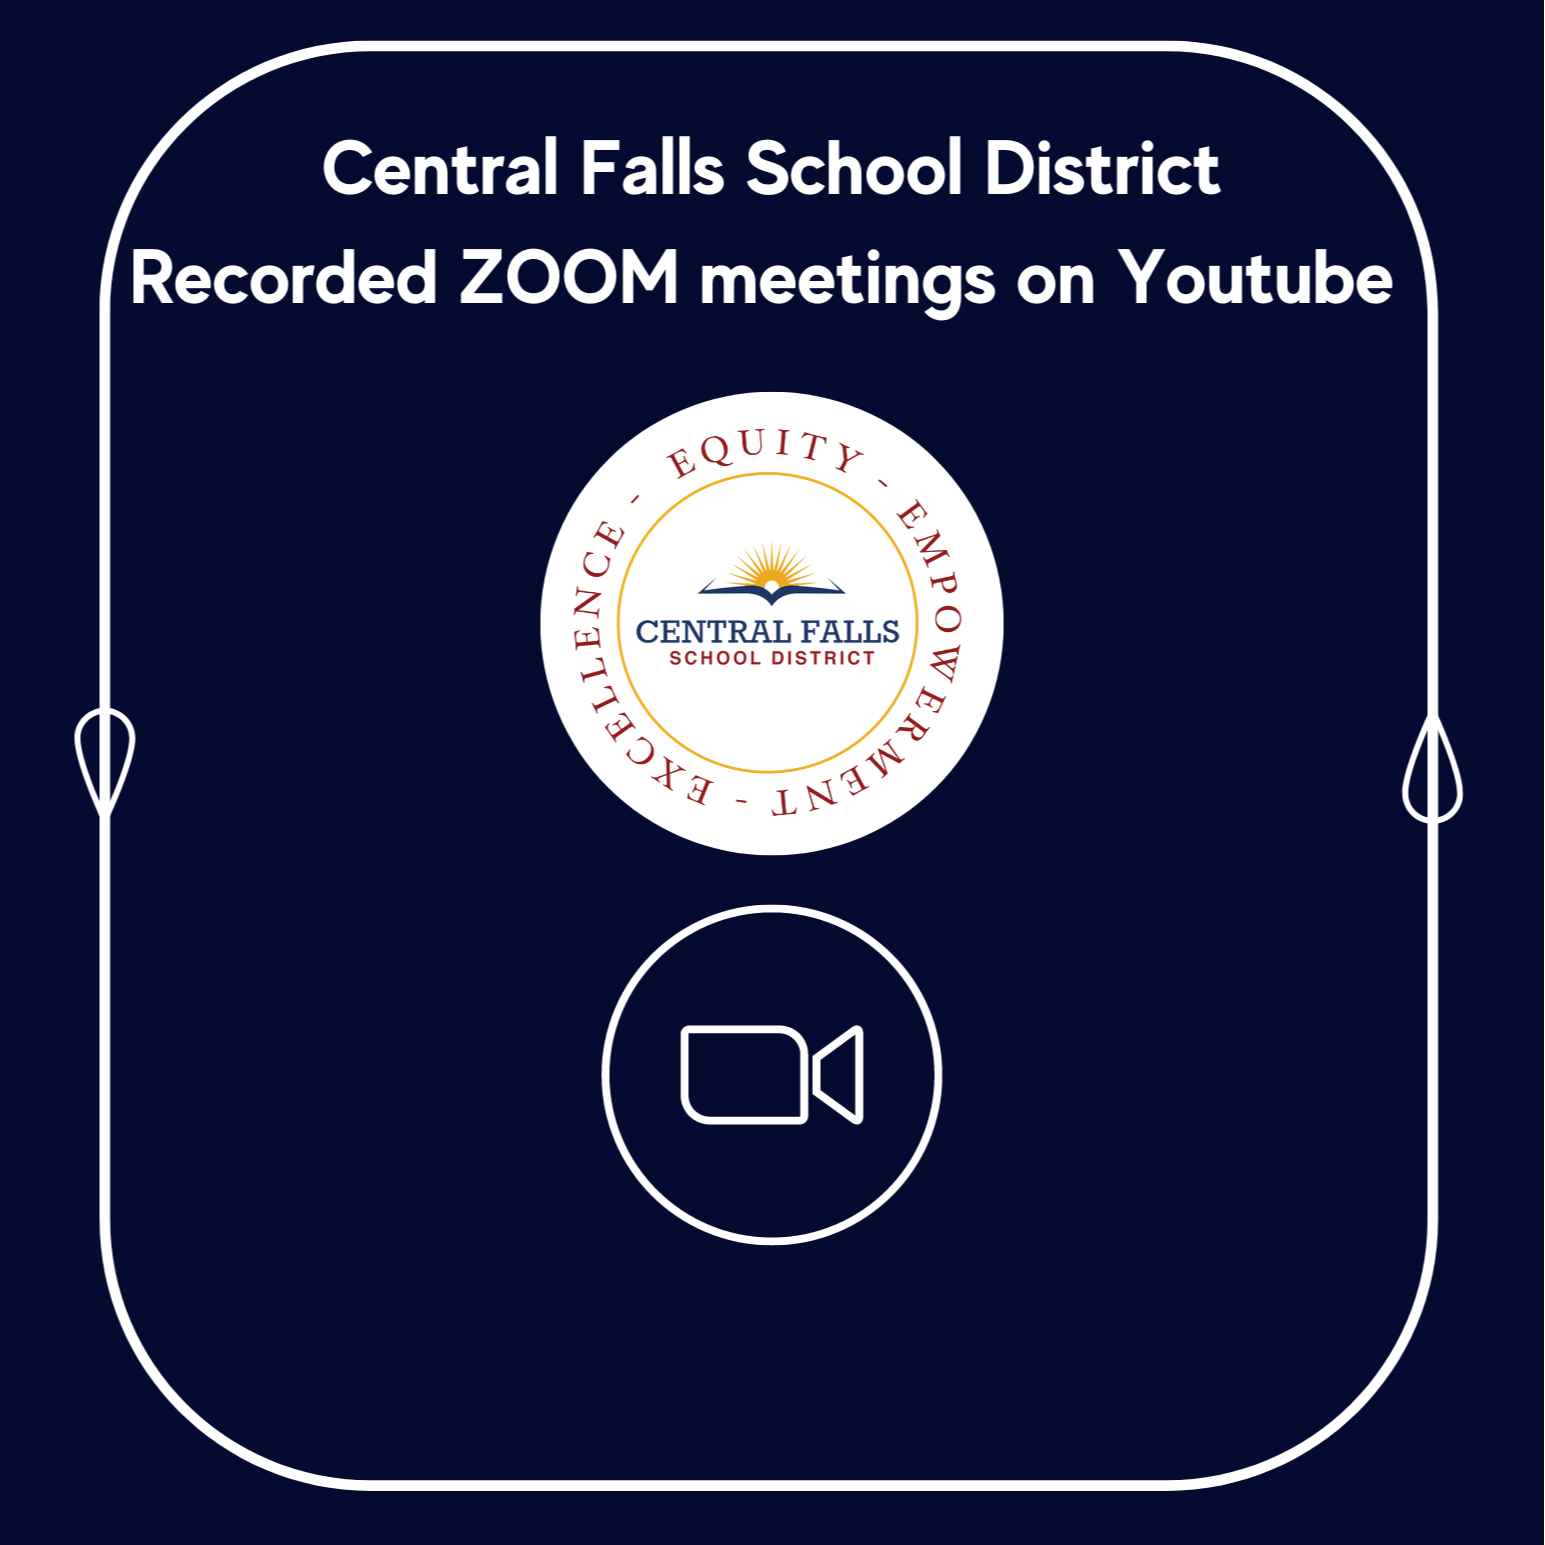 Recorded ZOOM meetings on YouTube.